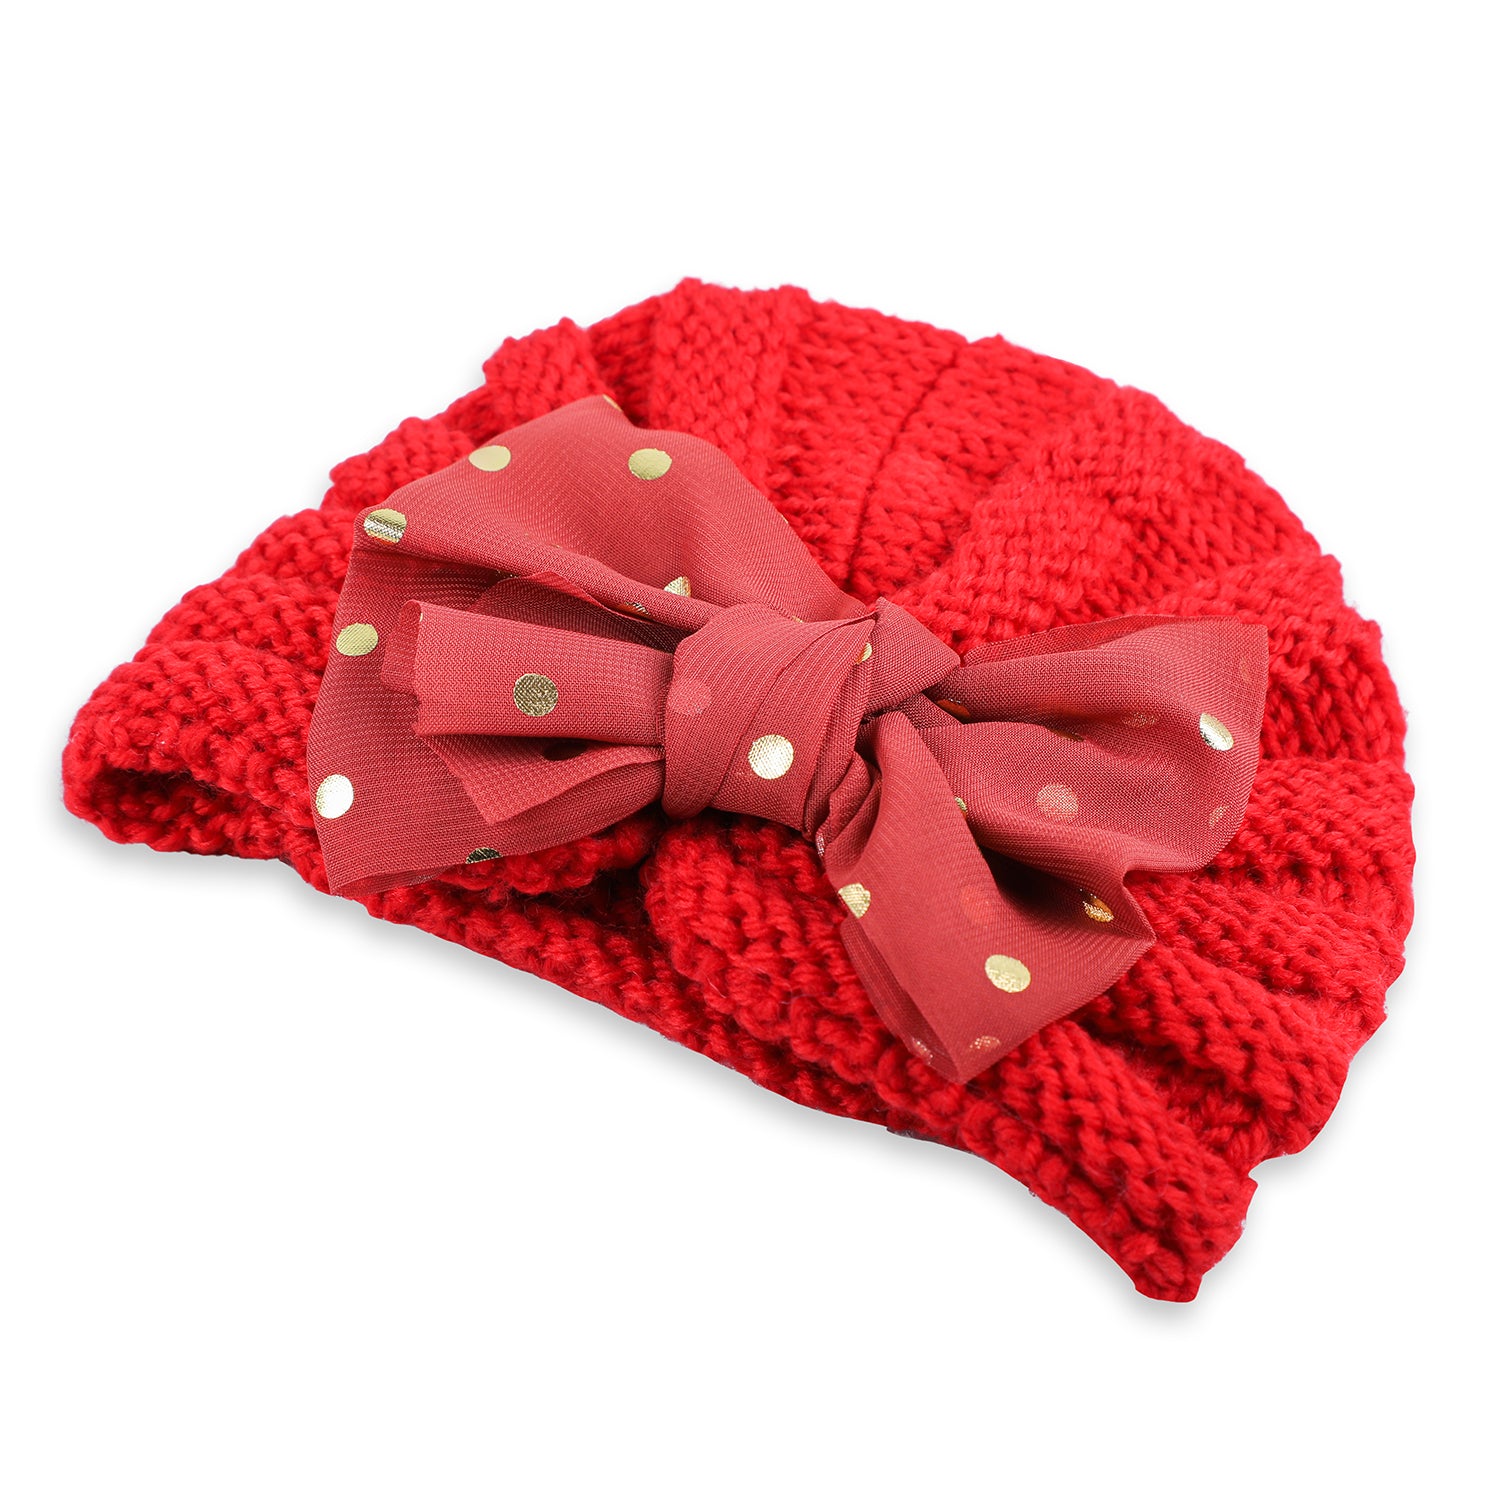 Baby Moo Partywear Sequence Bow 2 Pack Turban Caps - Red And Grey - Baby Moo